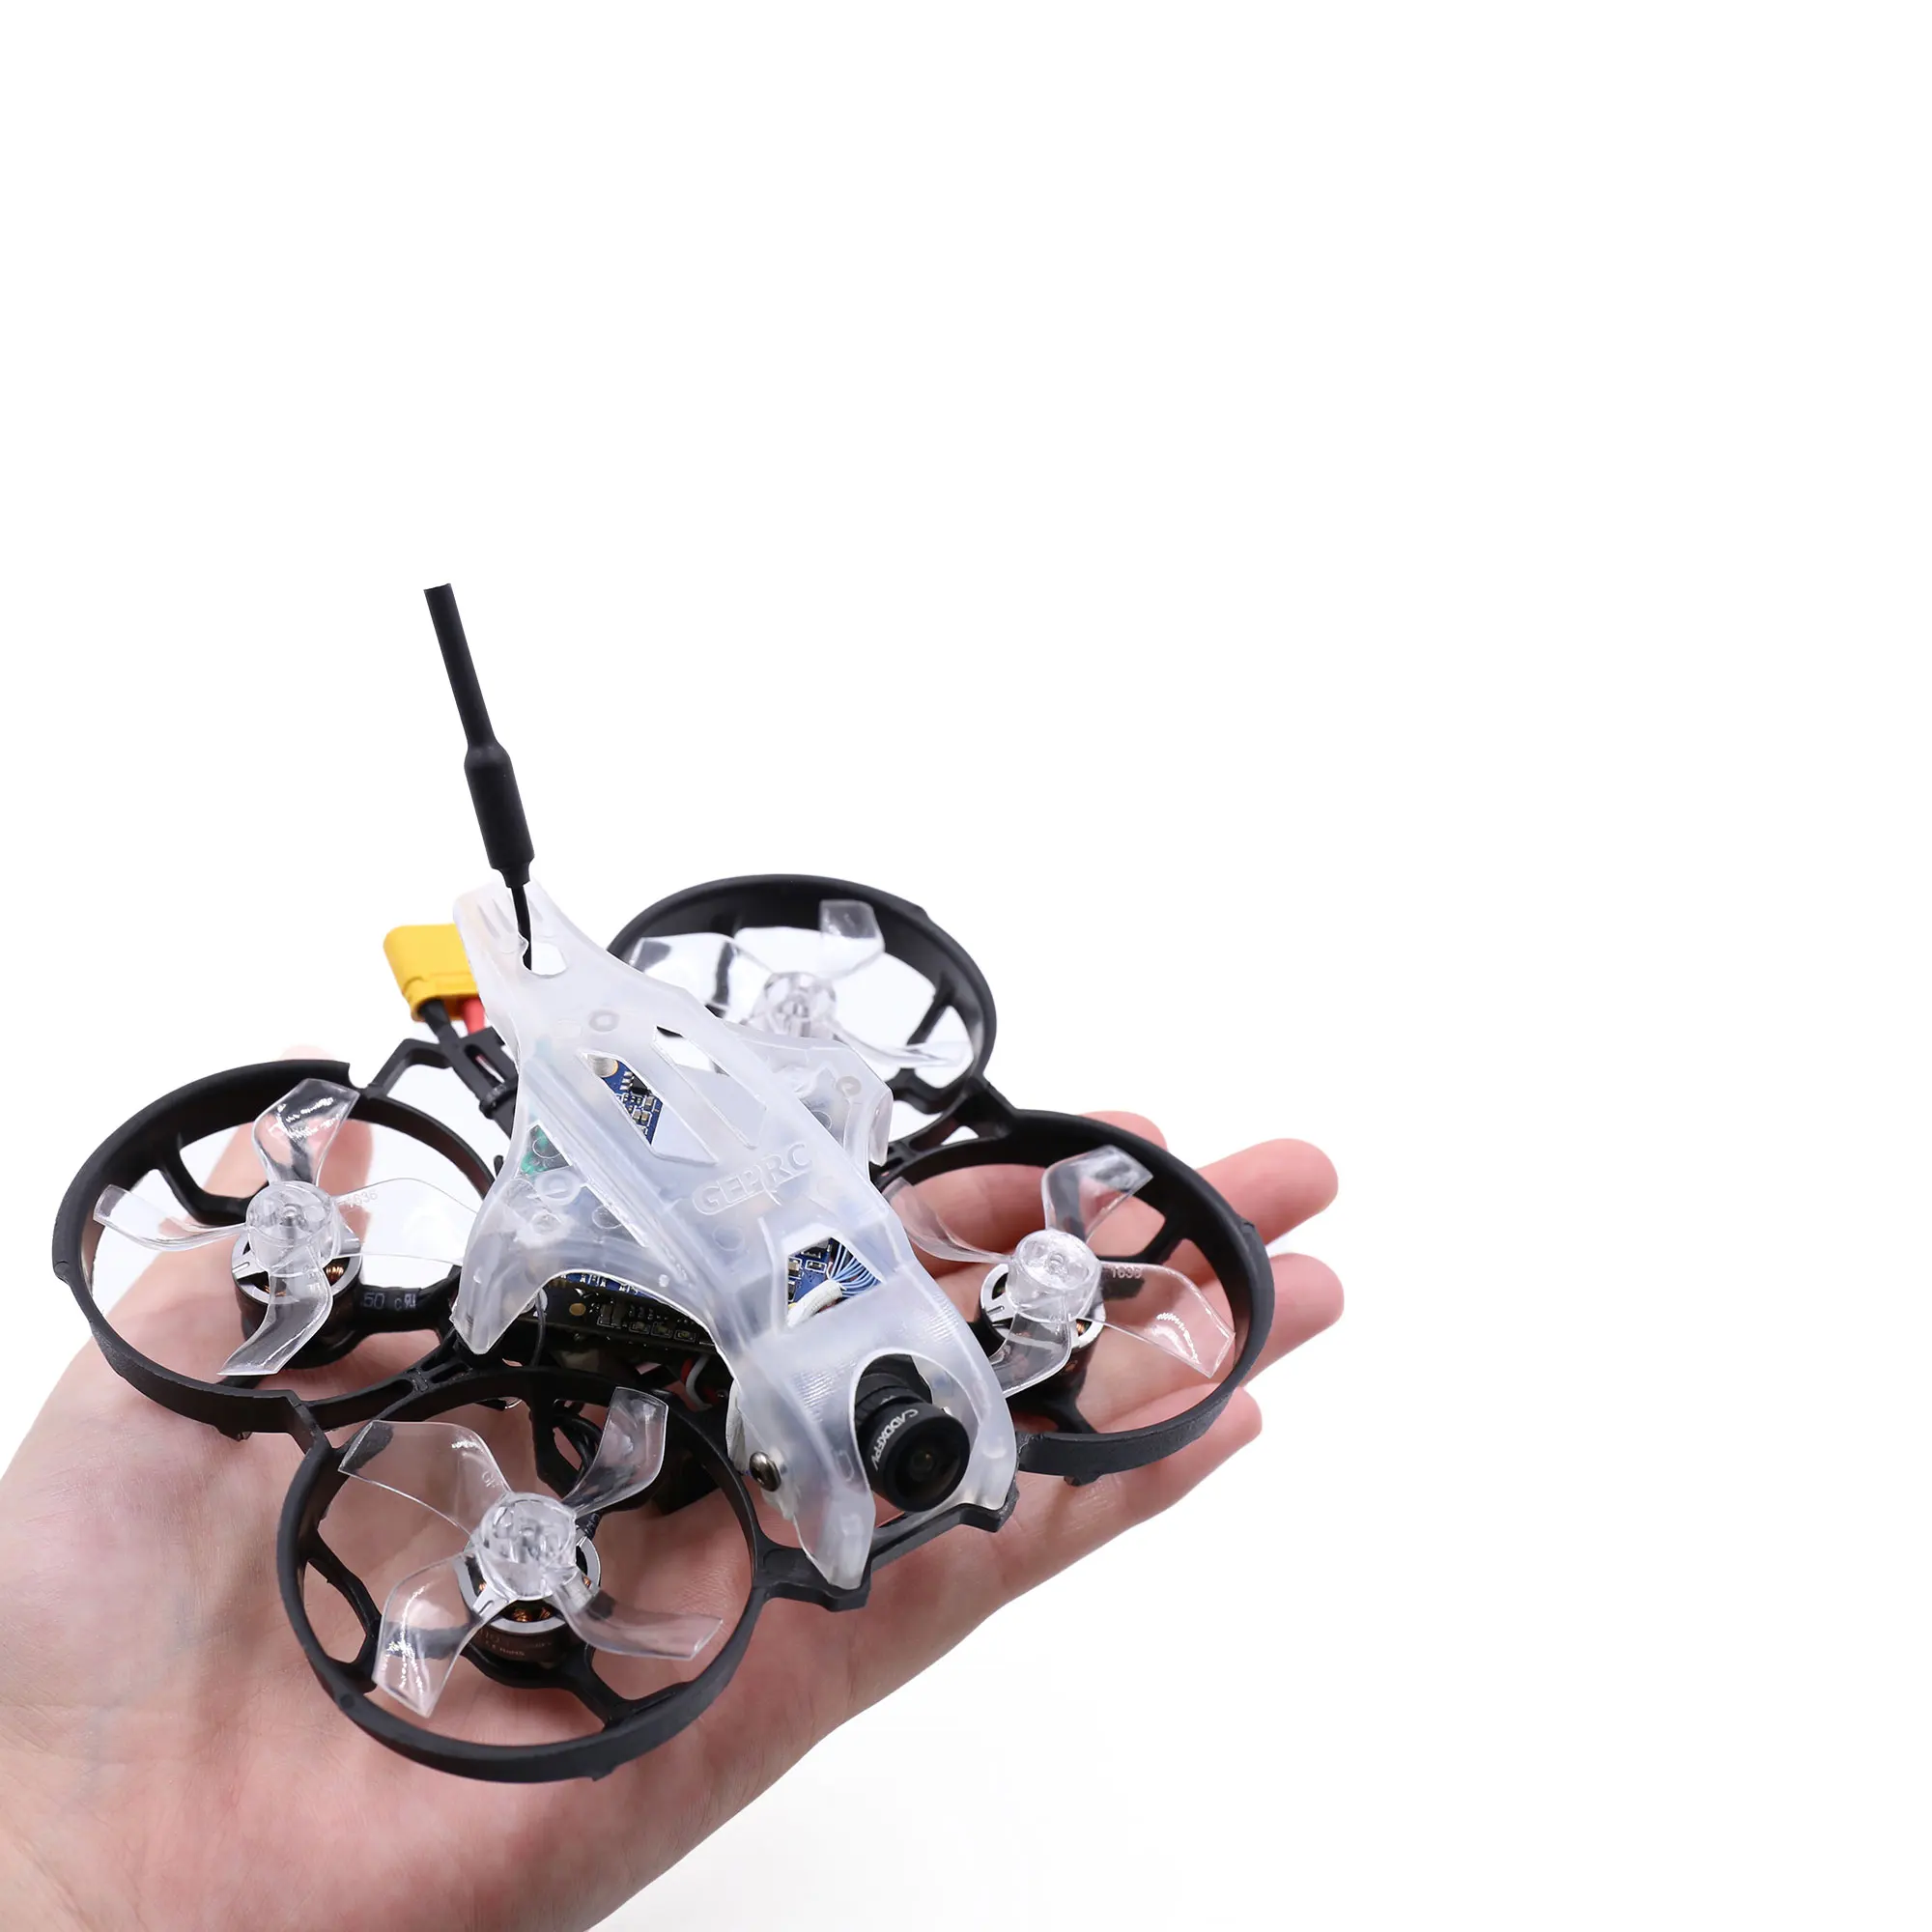 GEPRC Thinking P16 4K GEP-12A-F4 AIO 5.8G 200mW Caddx Loris 4K GR1103 8000KV 3S 79mm 1.6inch FPV Tinywhoop Cinewhoop Drone 1